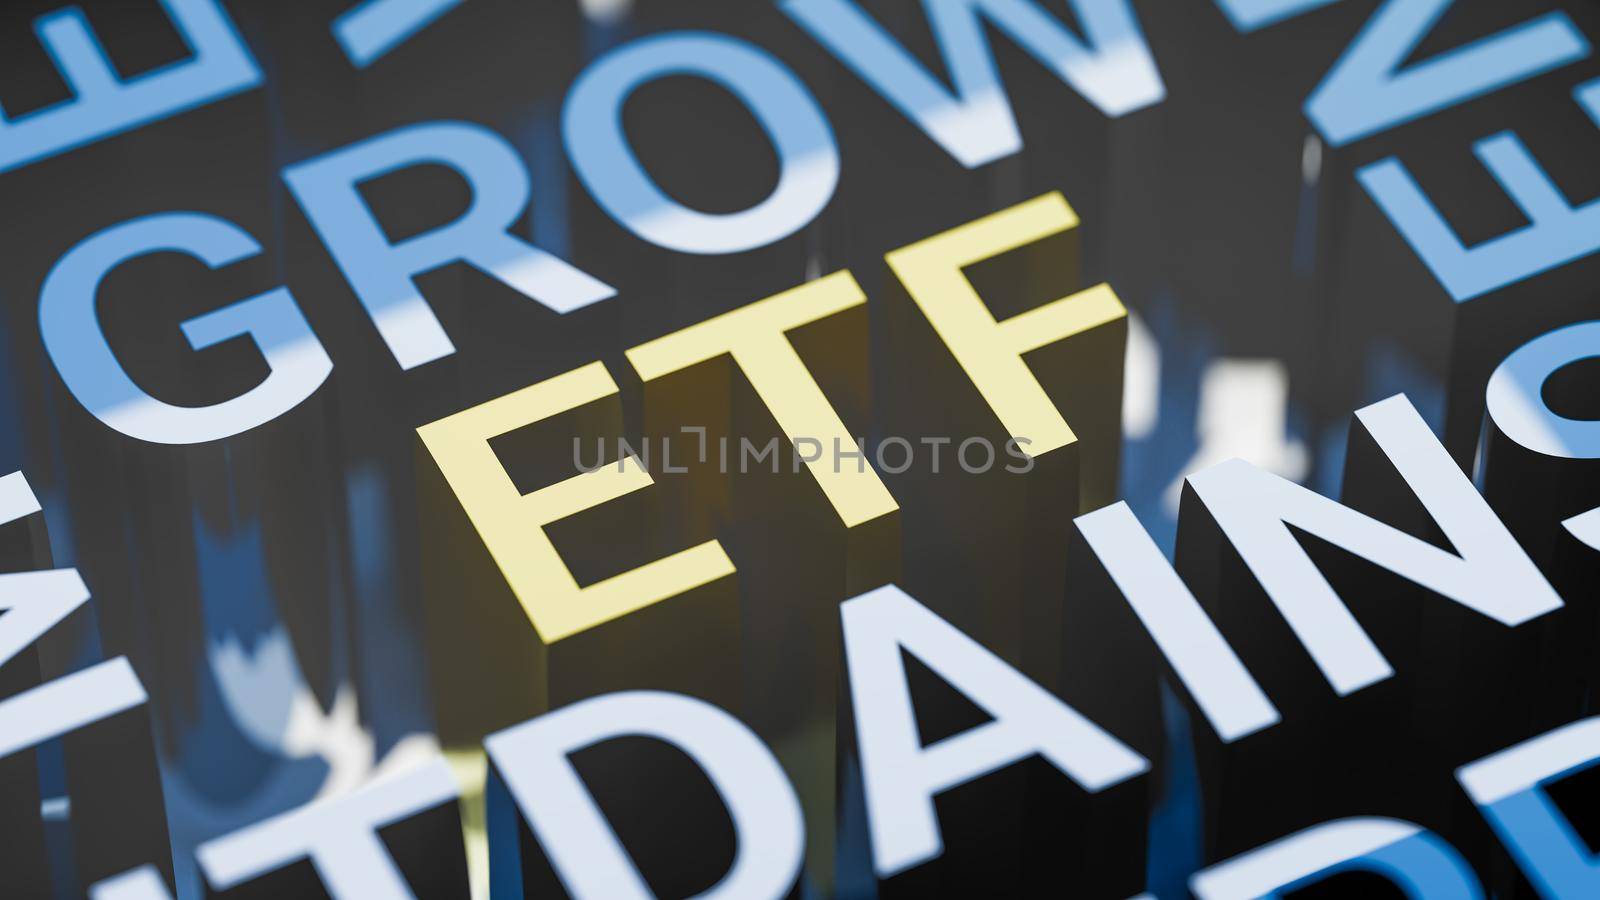 Concept image of business tag ETF. Three-dimensional letters geometrically on a white background. EBITDA, TRUST, INVESTMENT, DEPRECIATION, AMORTIZATION, MONEY, TAX, REIT, FINANCE, ENTERPRISE, VALUATION, EARNINGS, INSURANCE GROW MONEY REAL ESTATE 3d illustration